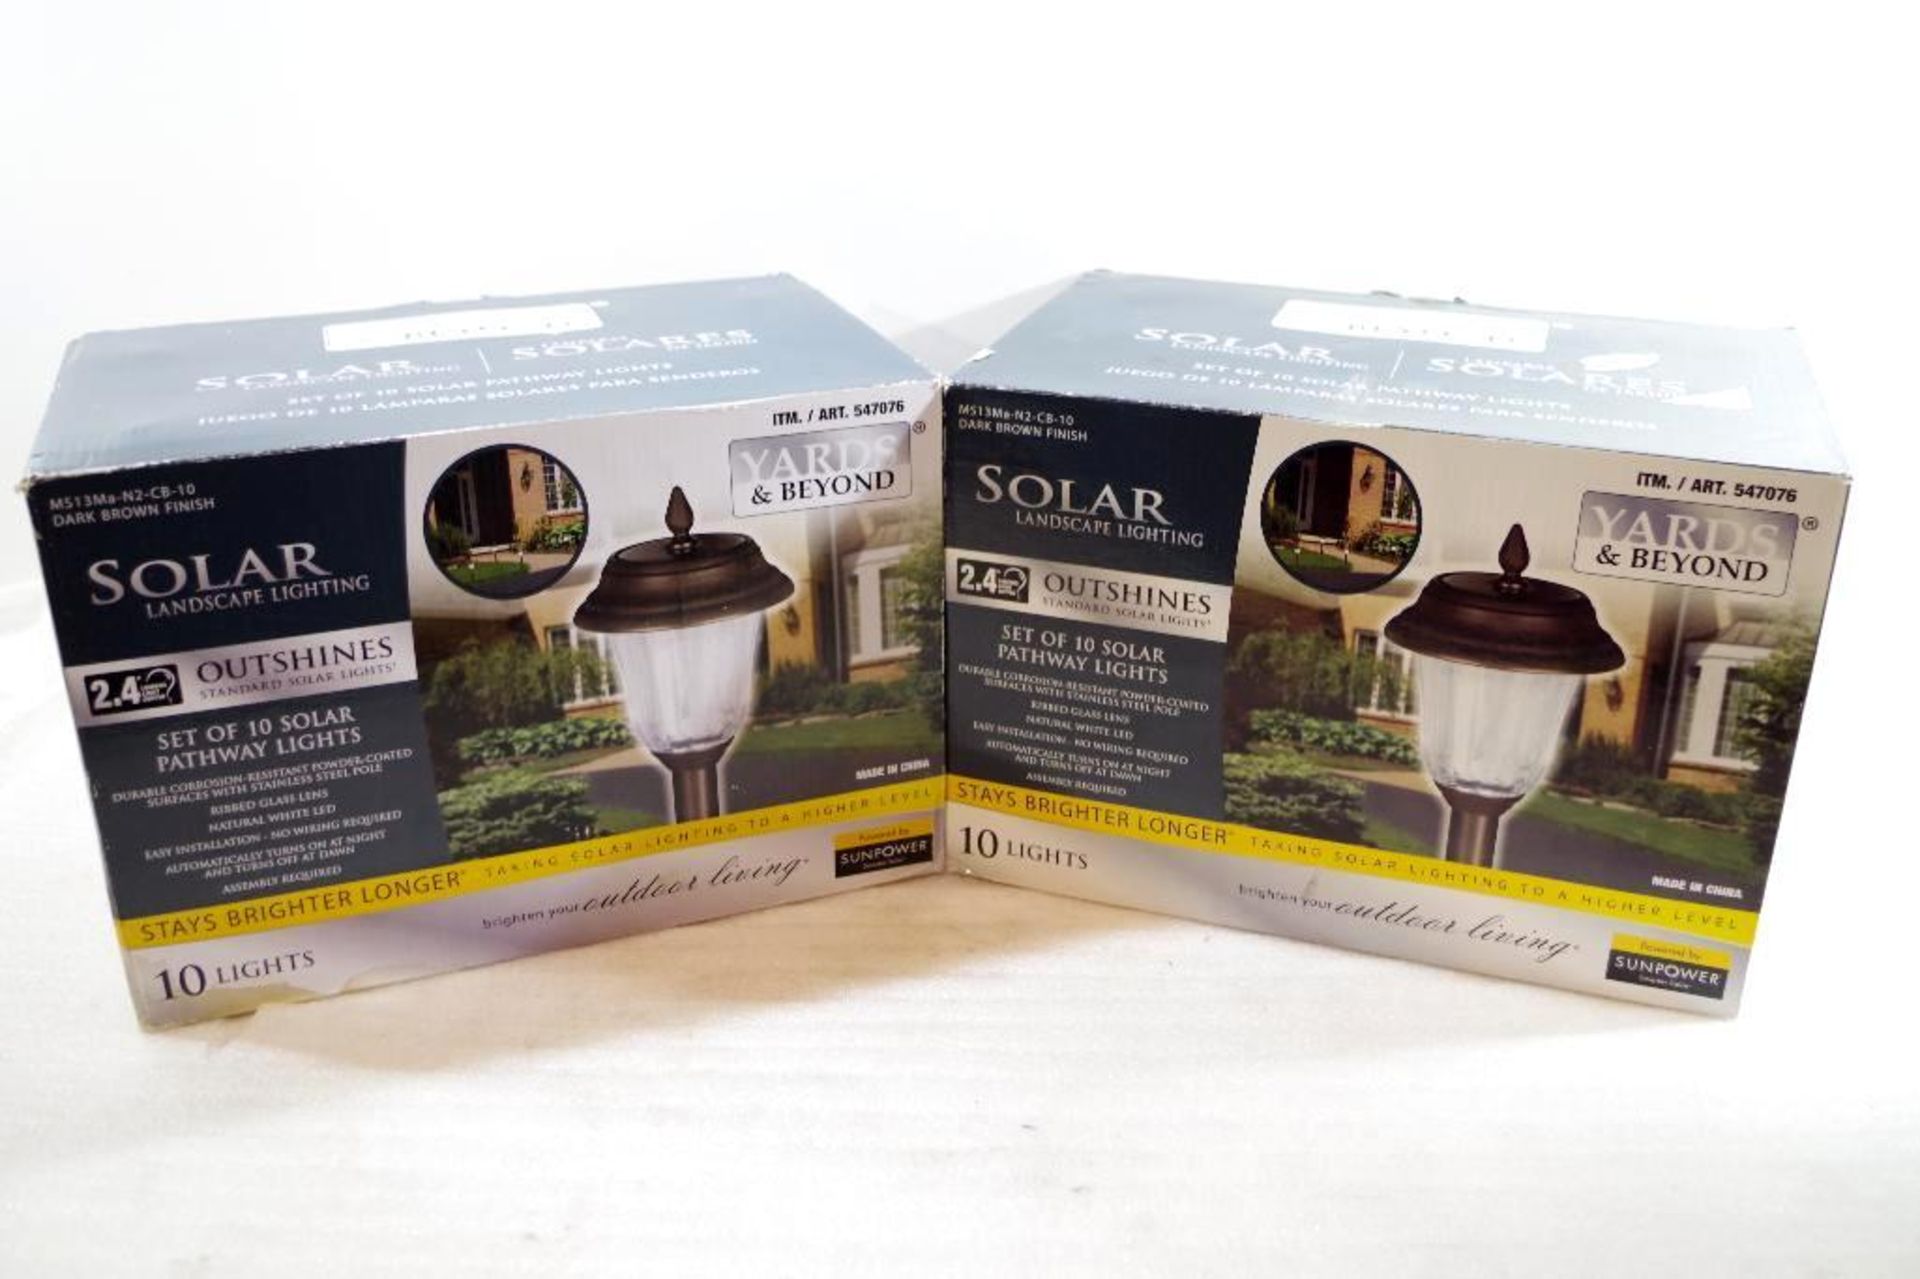 [2] YARDS & BEYOND Solar Pathway Light Sets (2 boxes of 10 lights each)